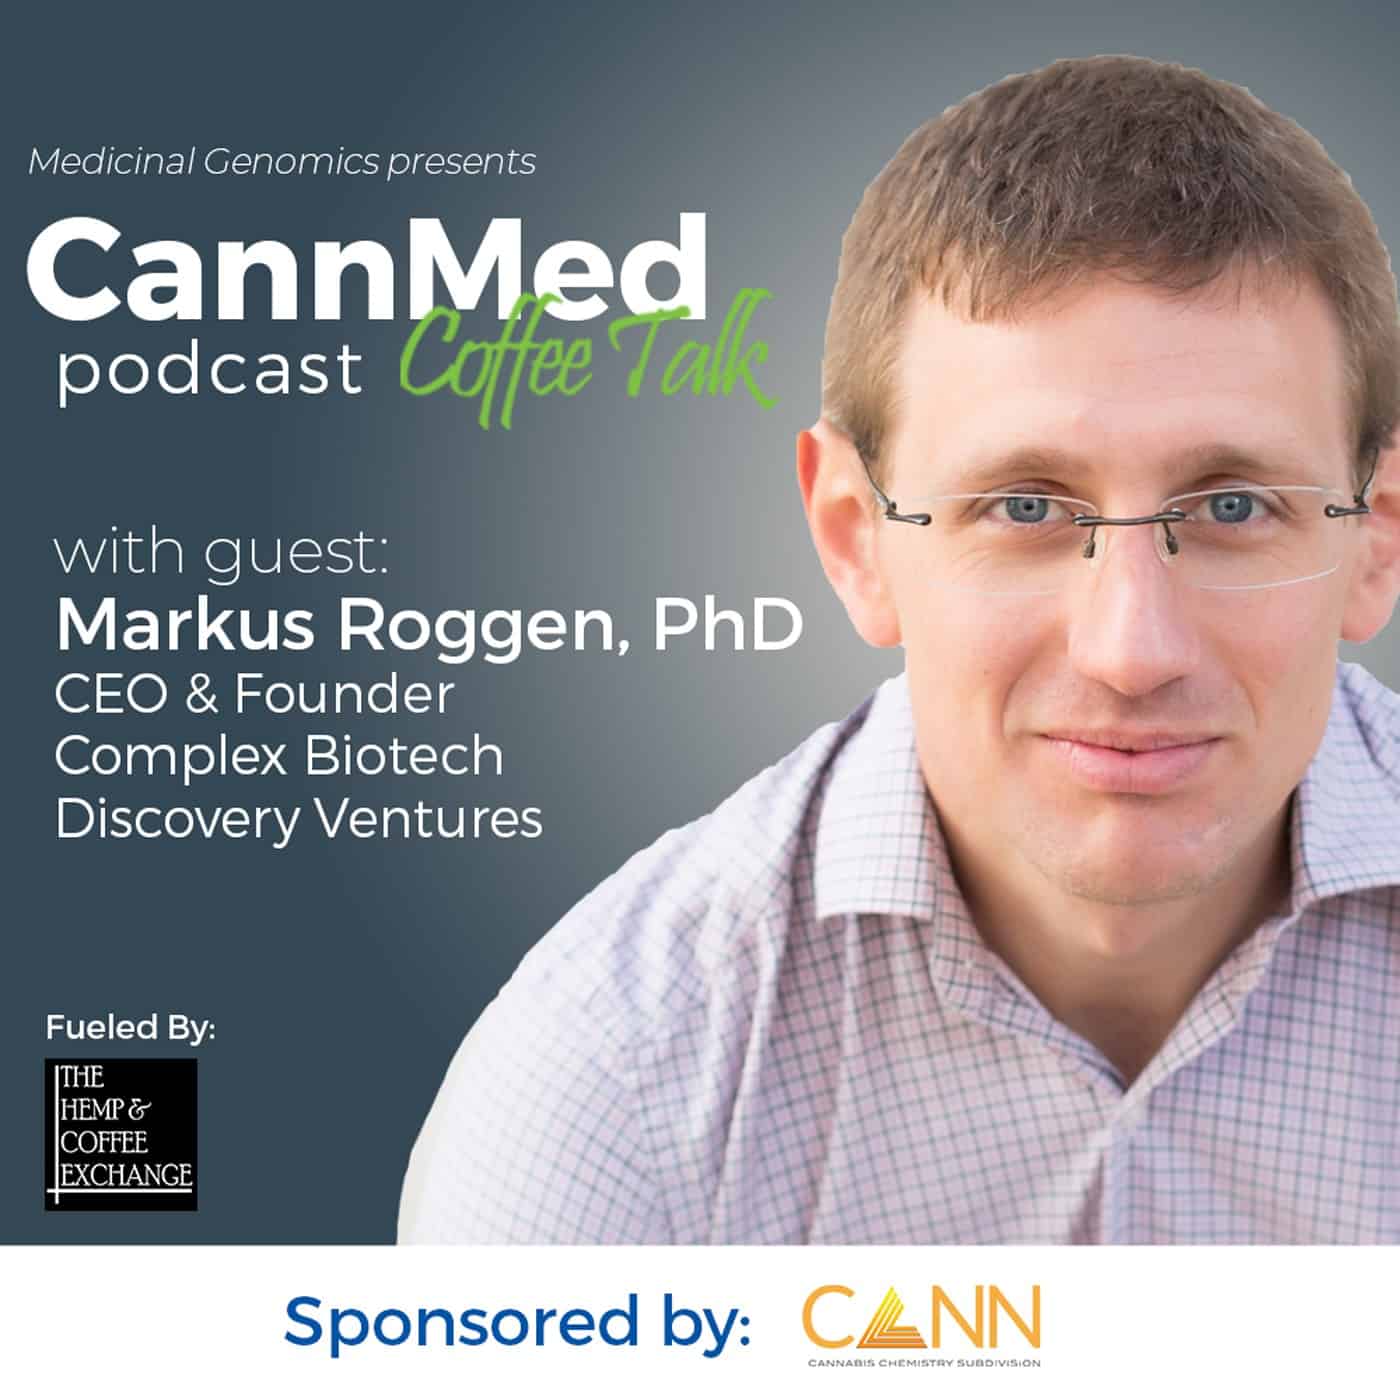 Featured image for “Extracting Cannabis Compounds with Markus Roggen, PhD”